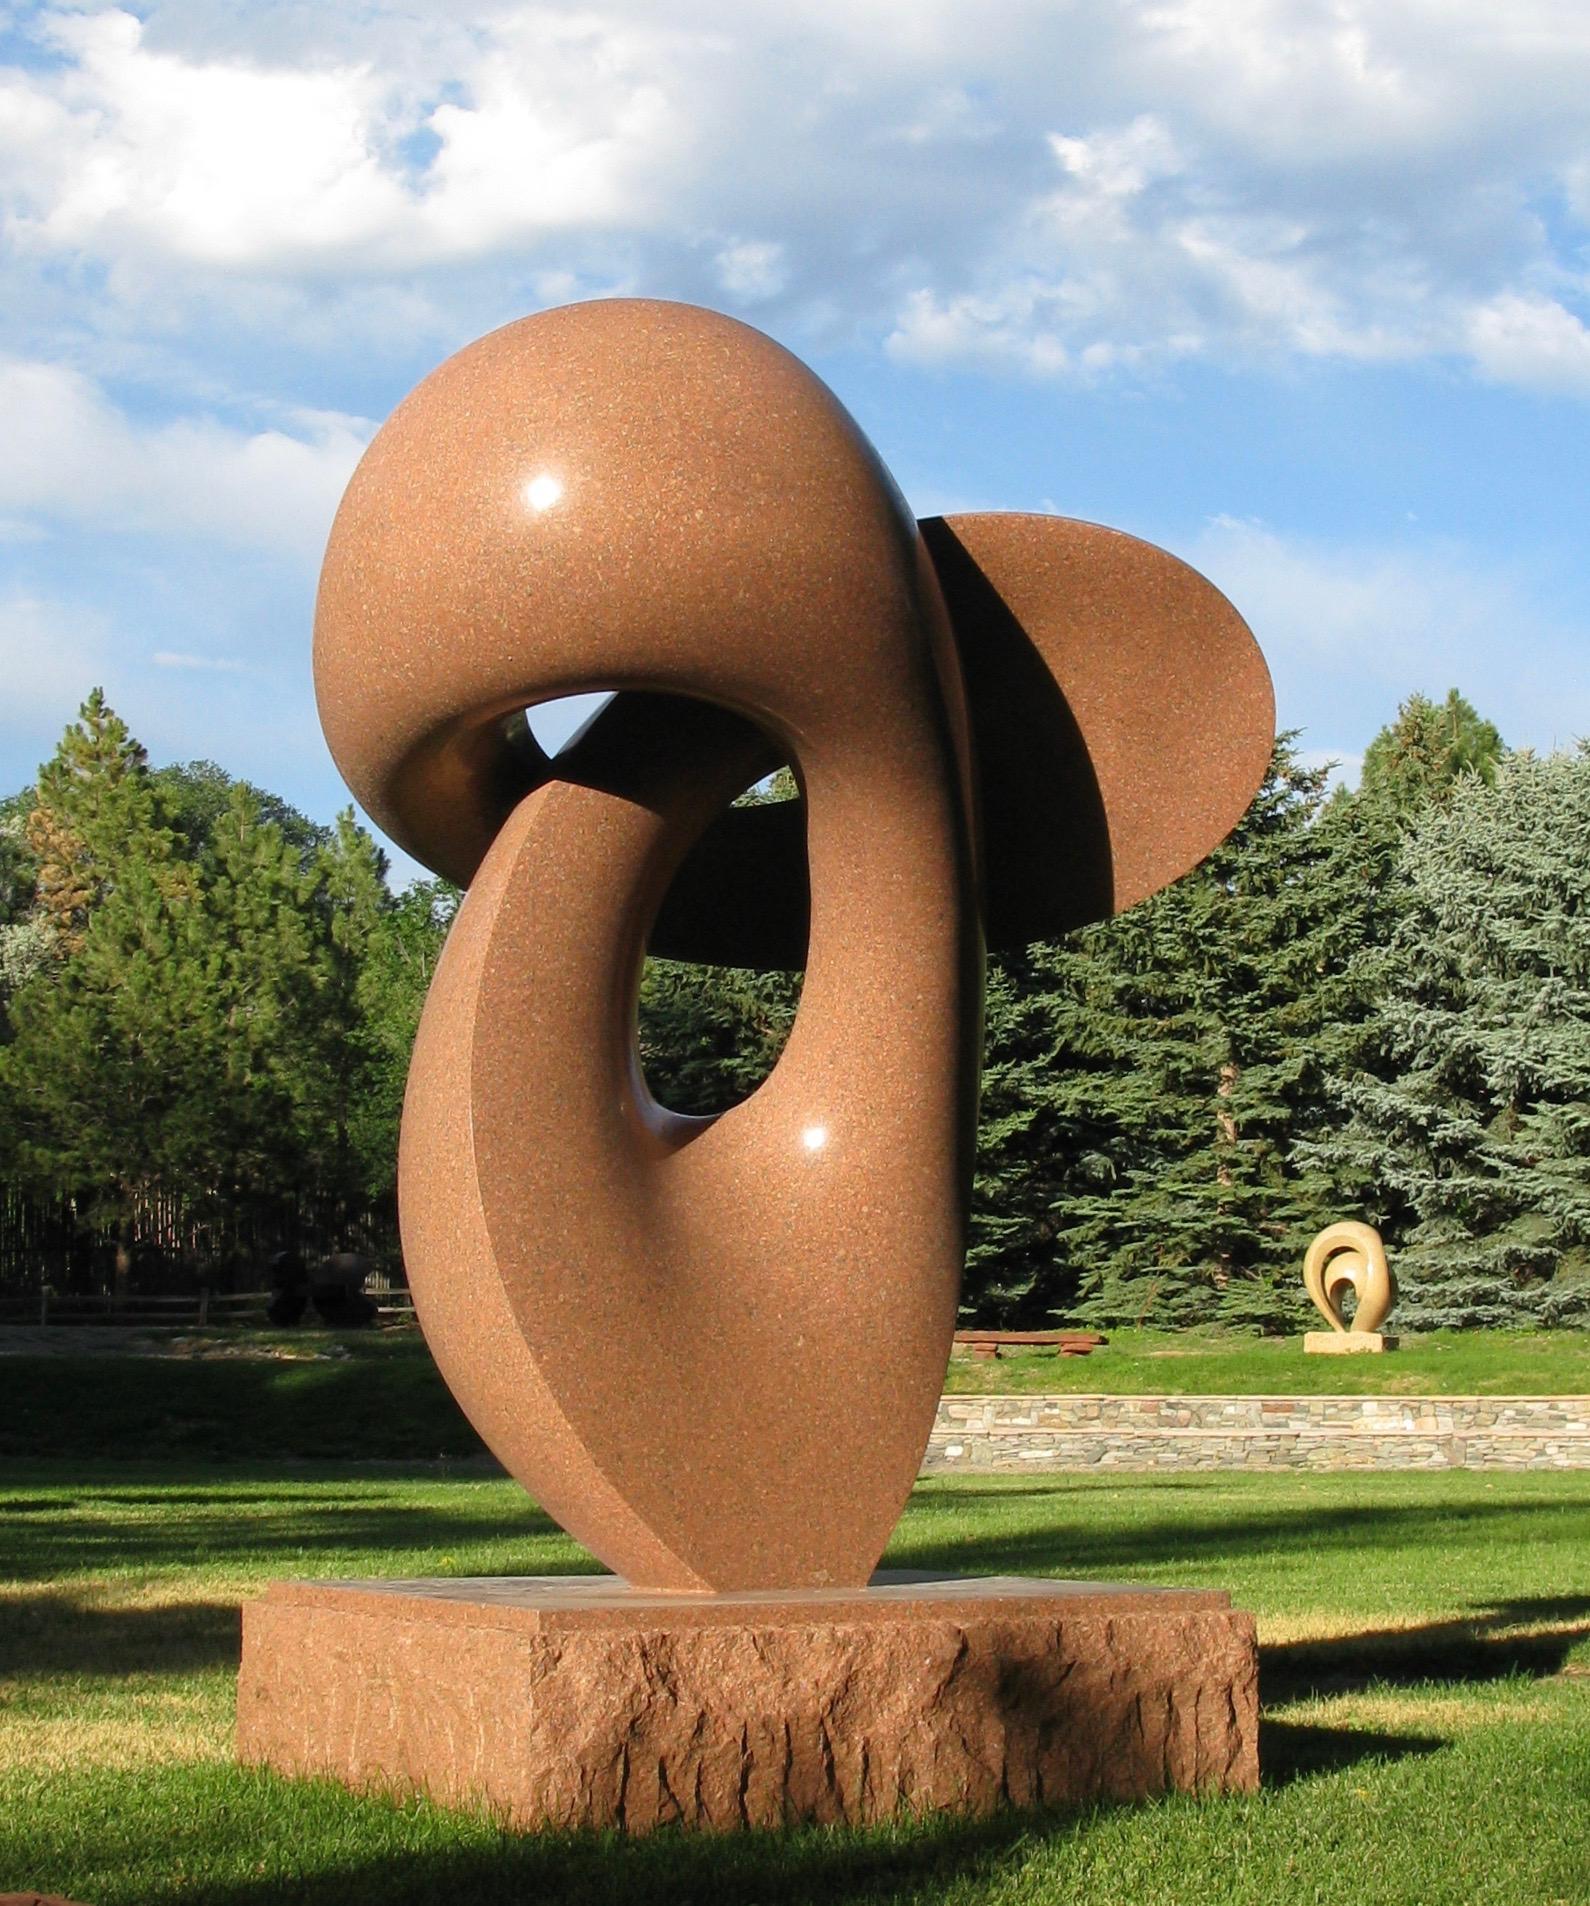 Khang Pham-New Abstract Sculpture - Infinity, polished red granite sculpture, monumental